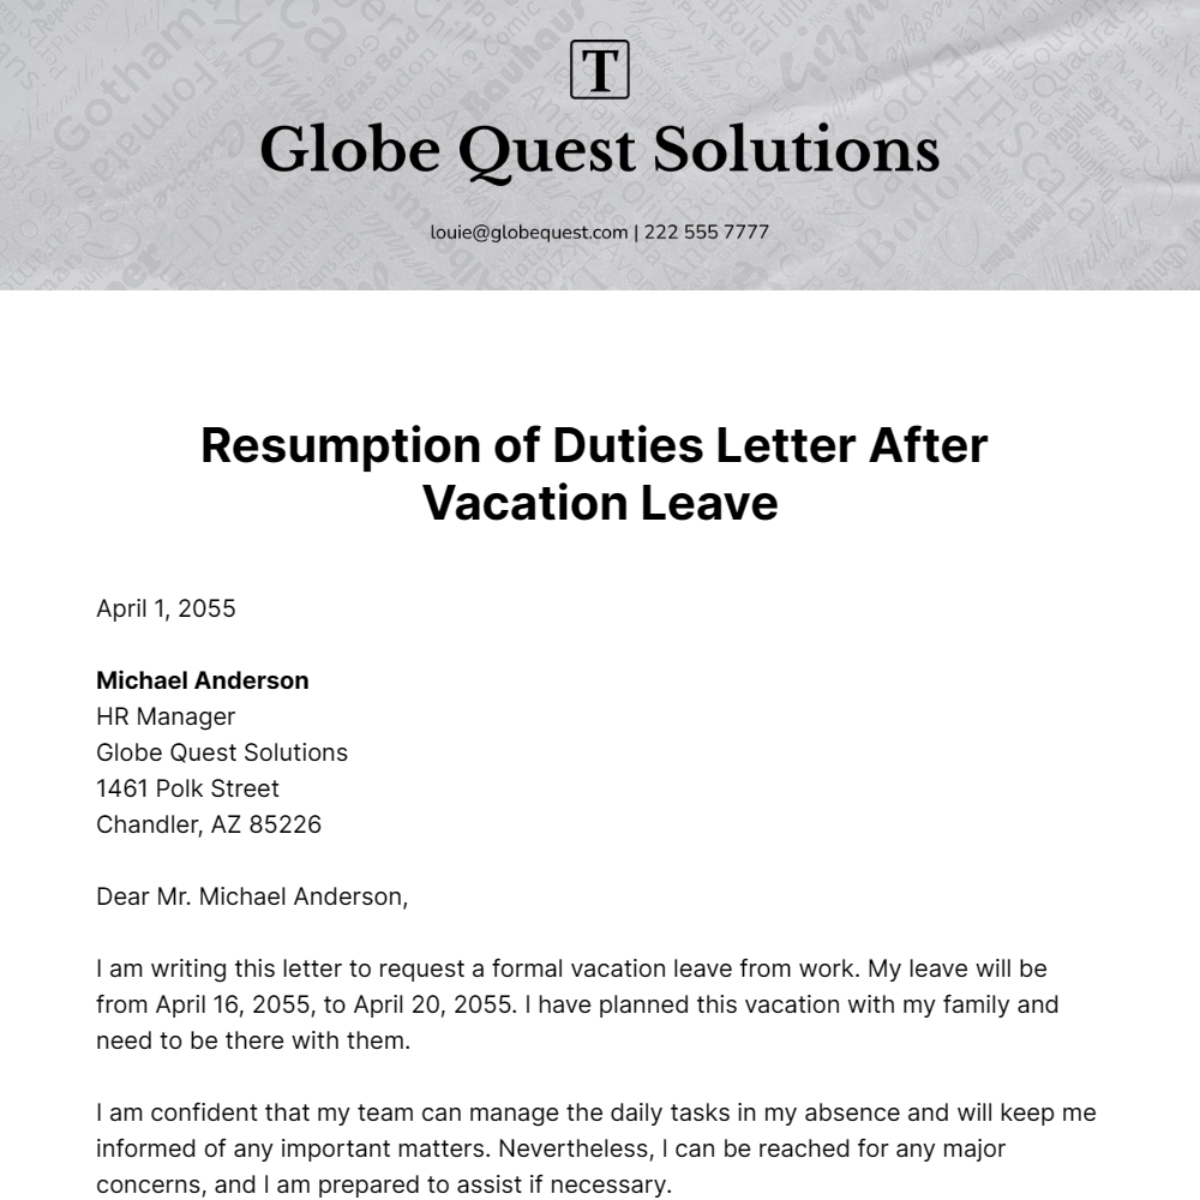 Resumption of Duties Letter After Vacation Leave Template